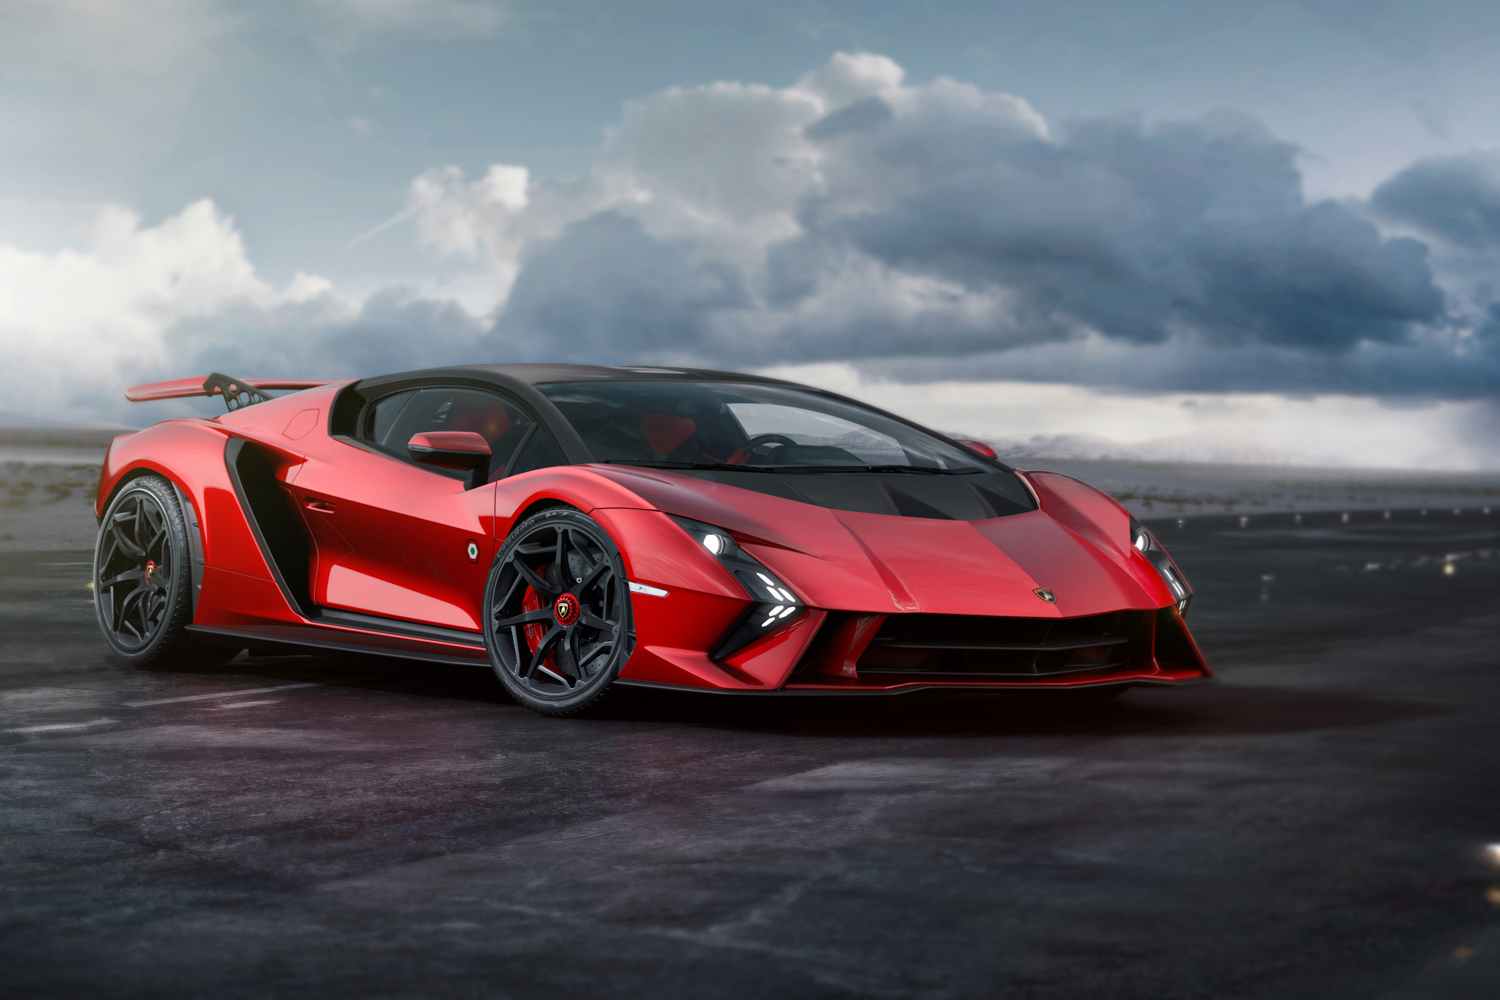 Car News | Lamborghini sees out V12 era with two one-off specials | CompleteCar.ie